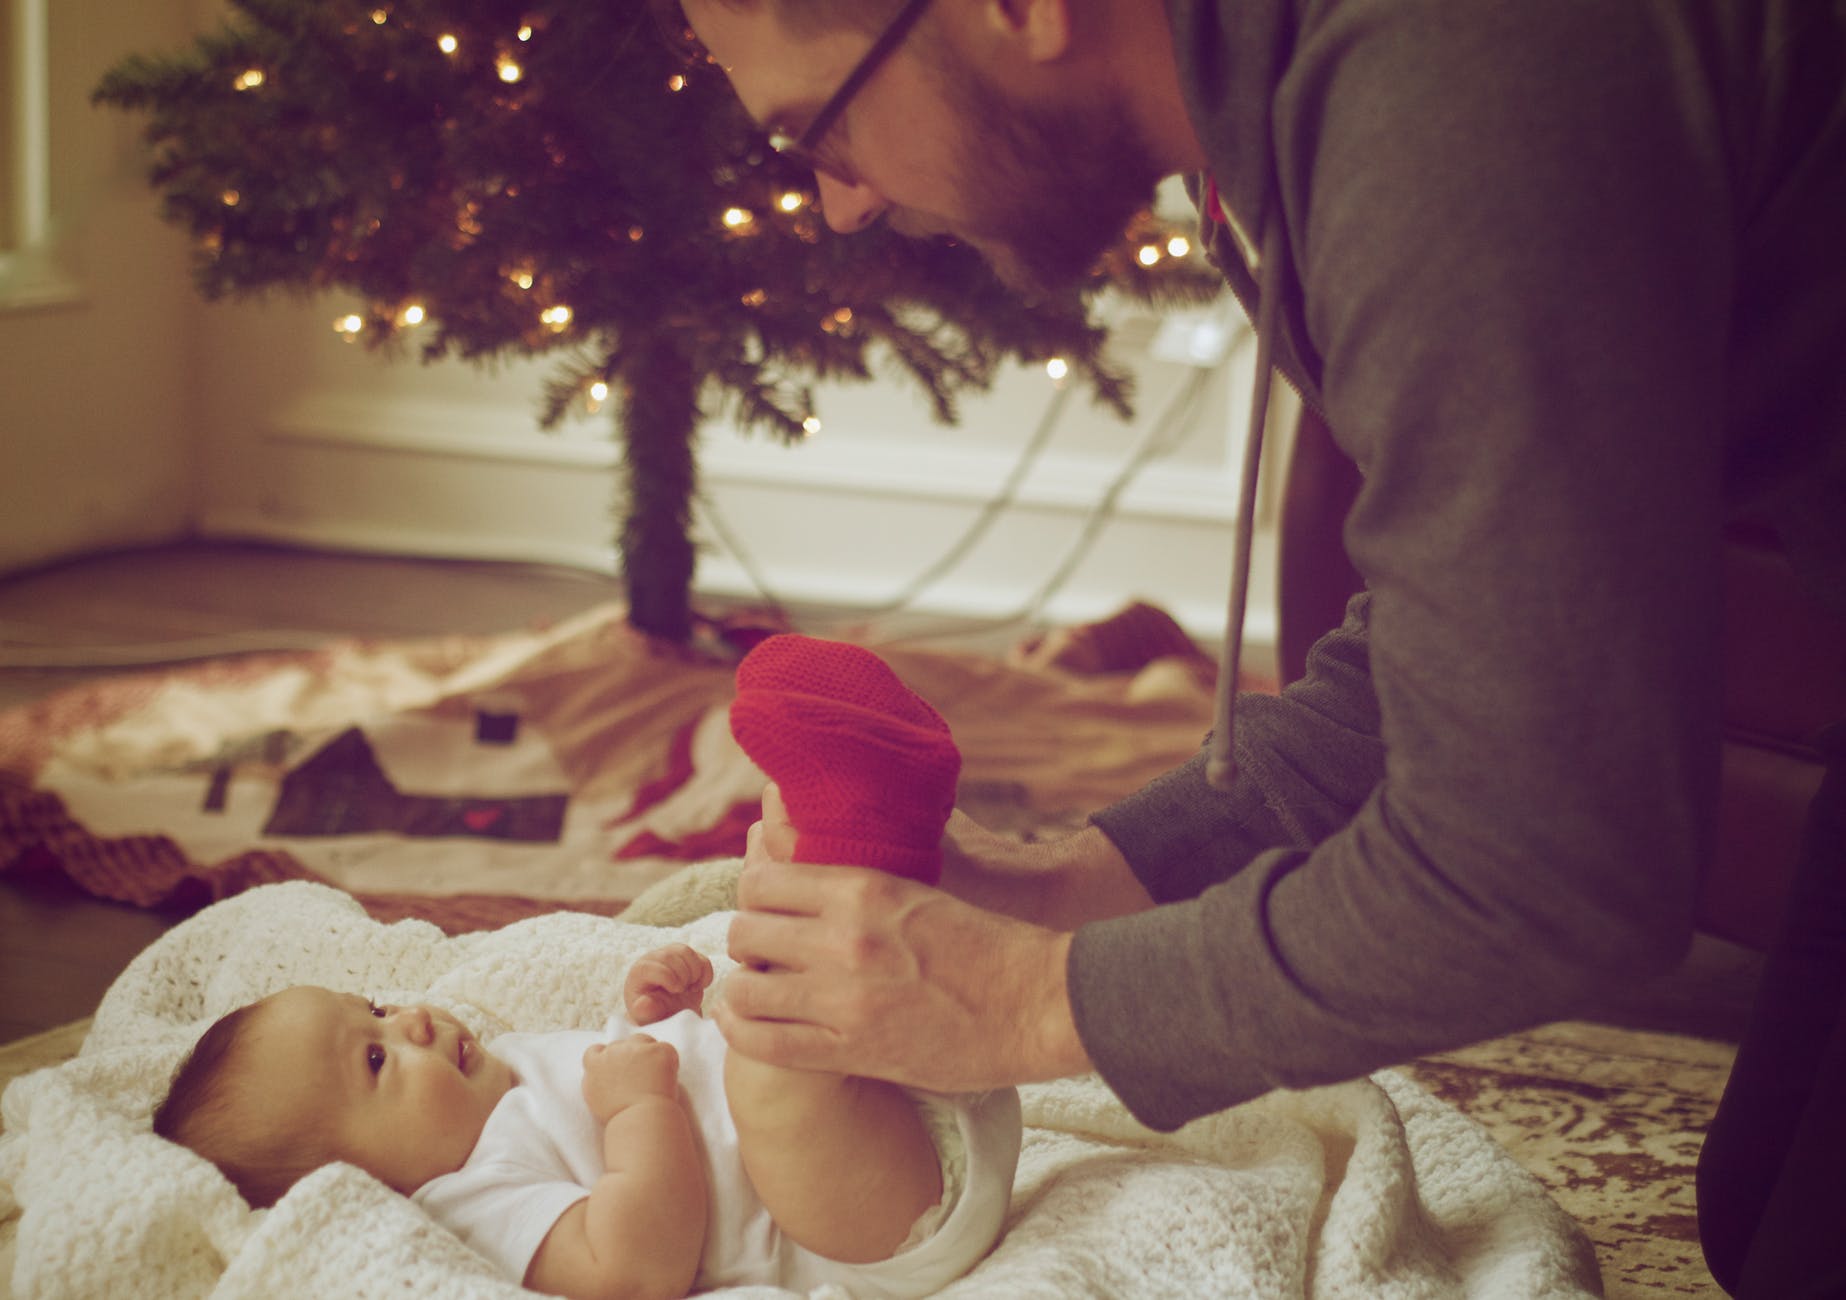 A photo of a doting father taking care of his child and changing diapers. | Photo: Pexels